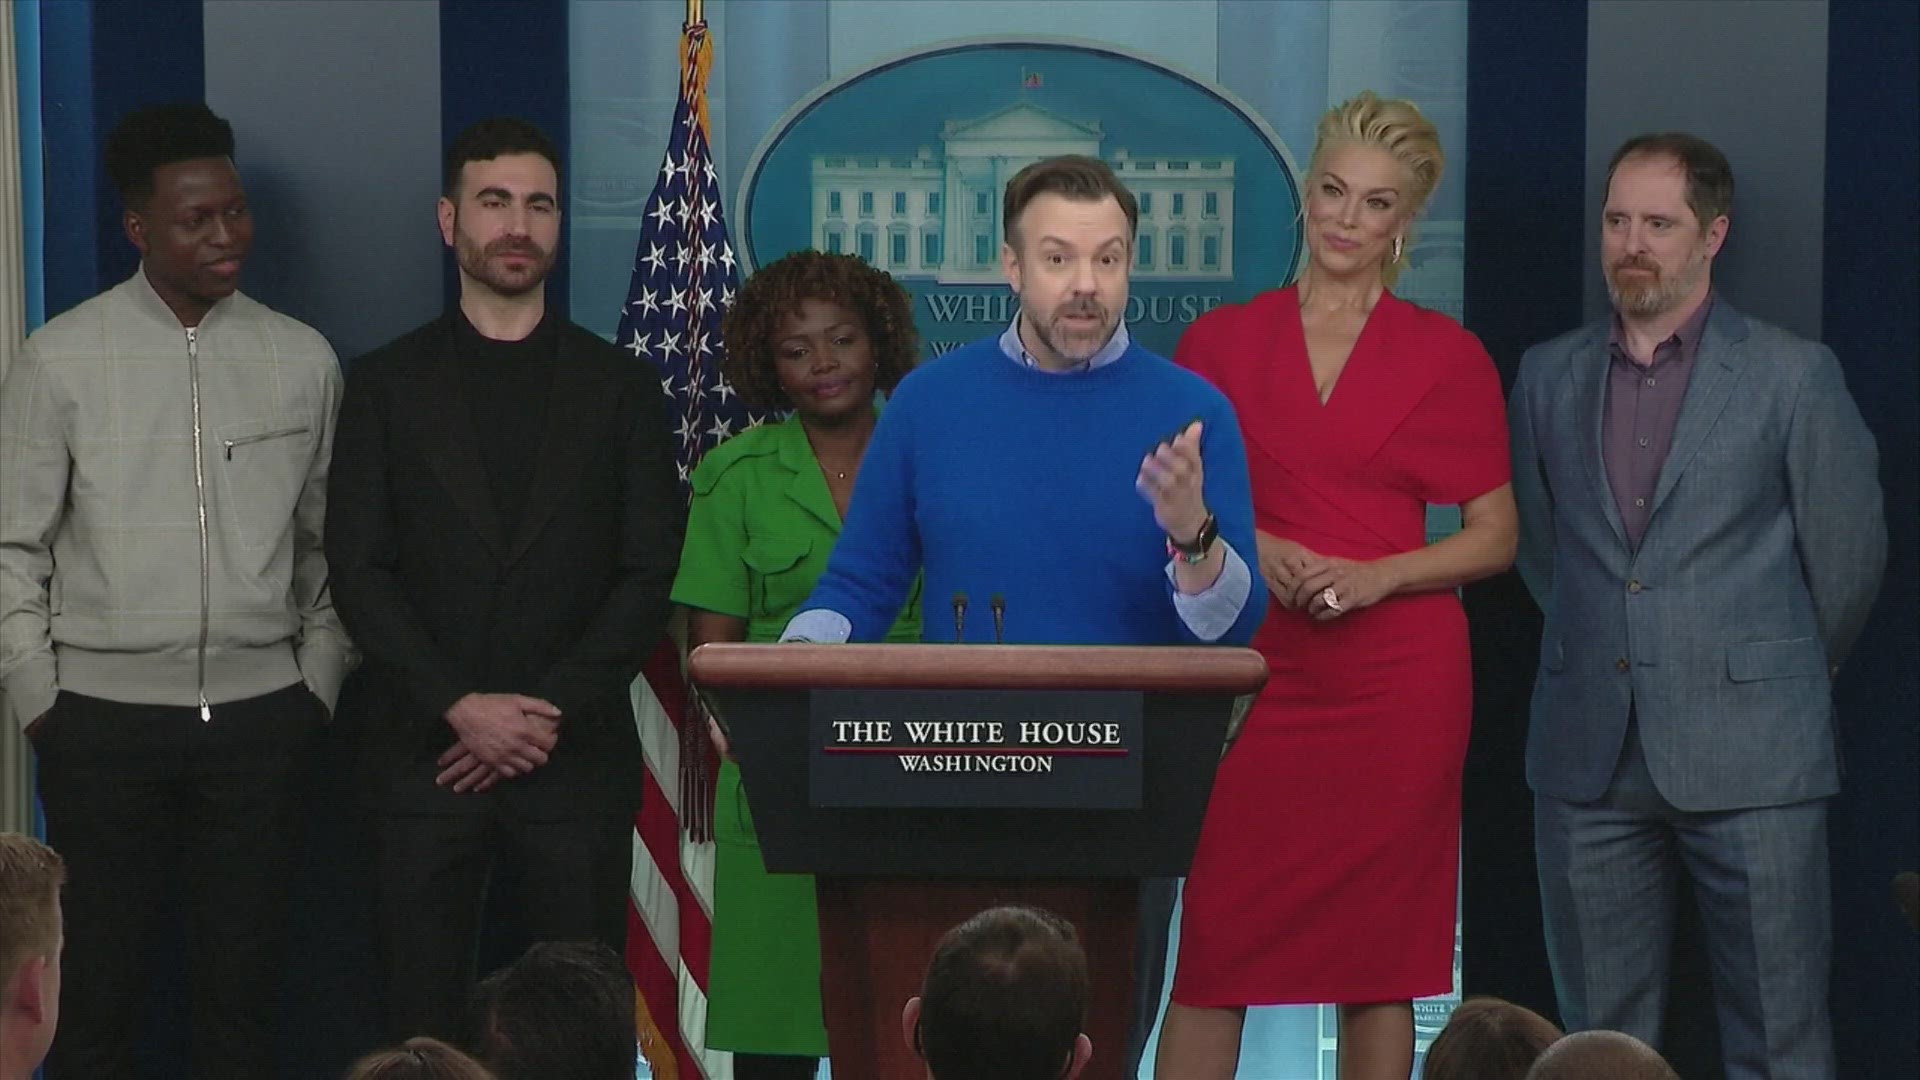 Comedian Jason Sudeikis, who plays Ted Lasso in the Apple TV+ series, helped press secretary Karine Jean-Pierre open her daily White House briefing.